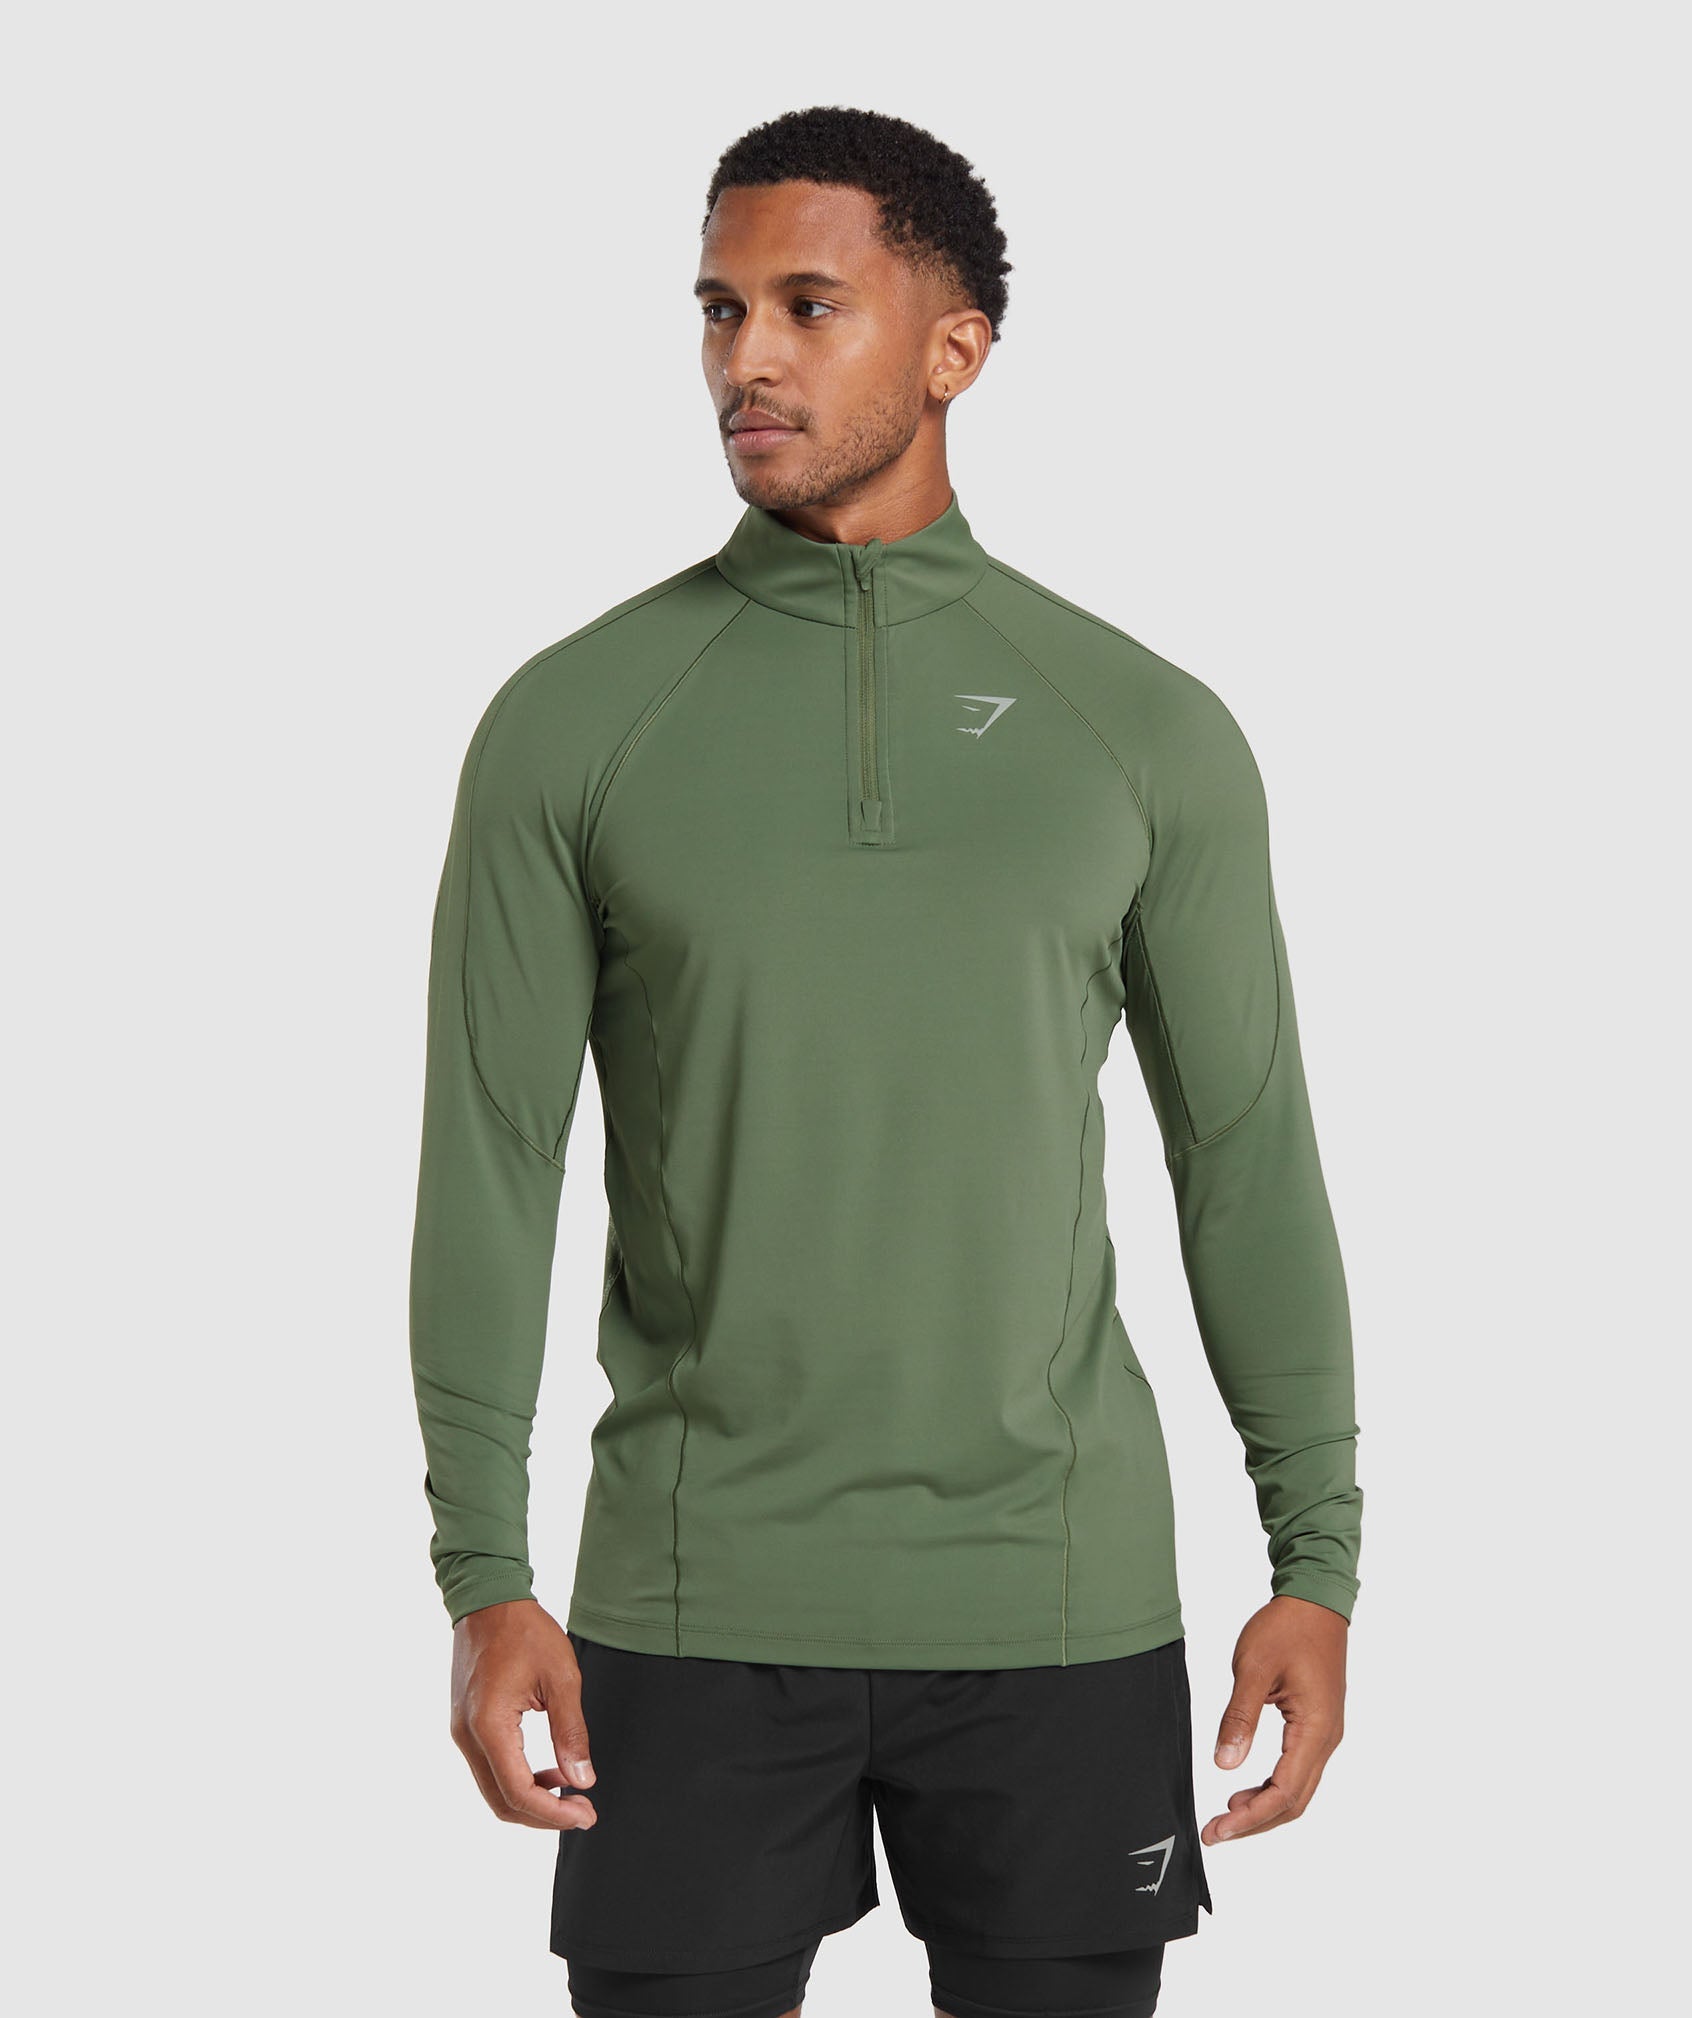 Speed 1/4 Zip in Core Olive - view 1